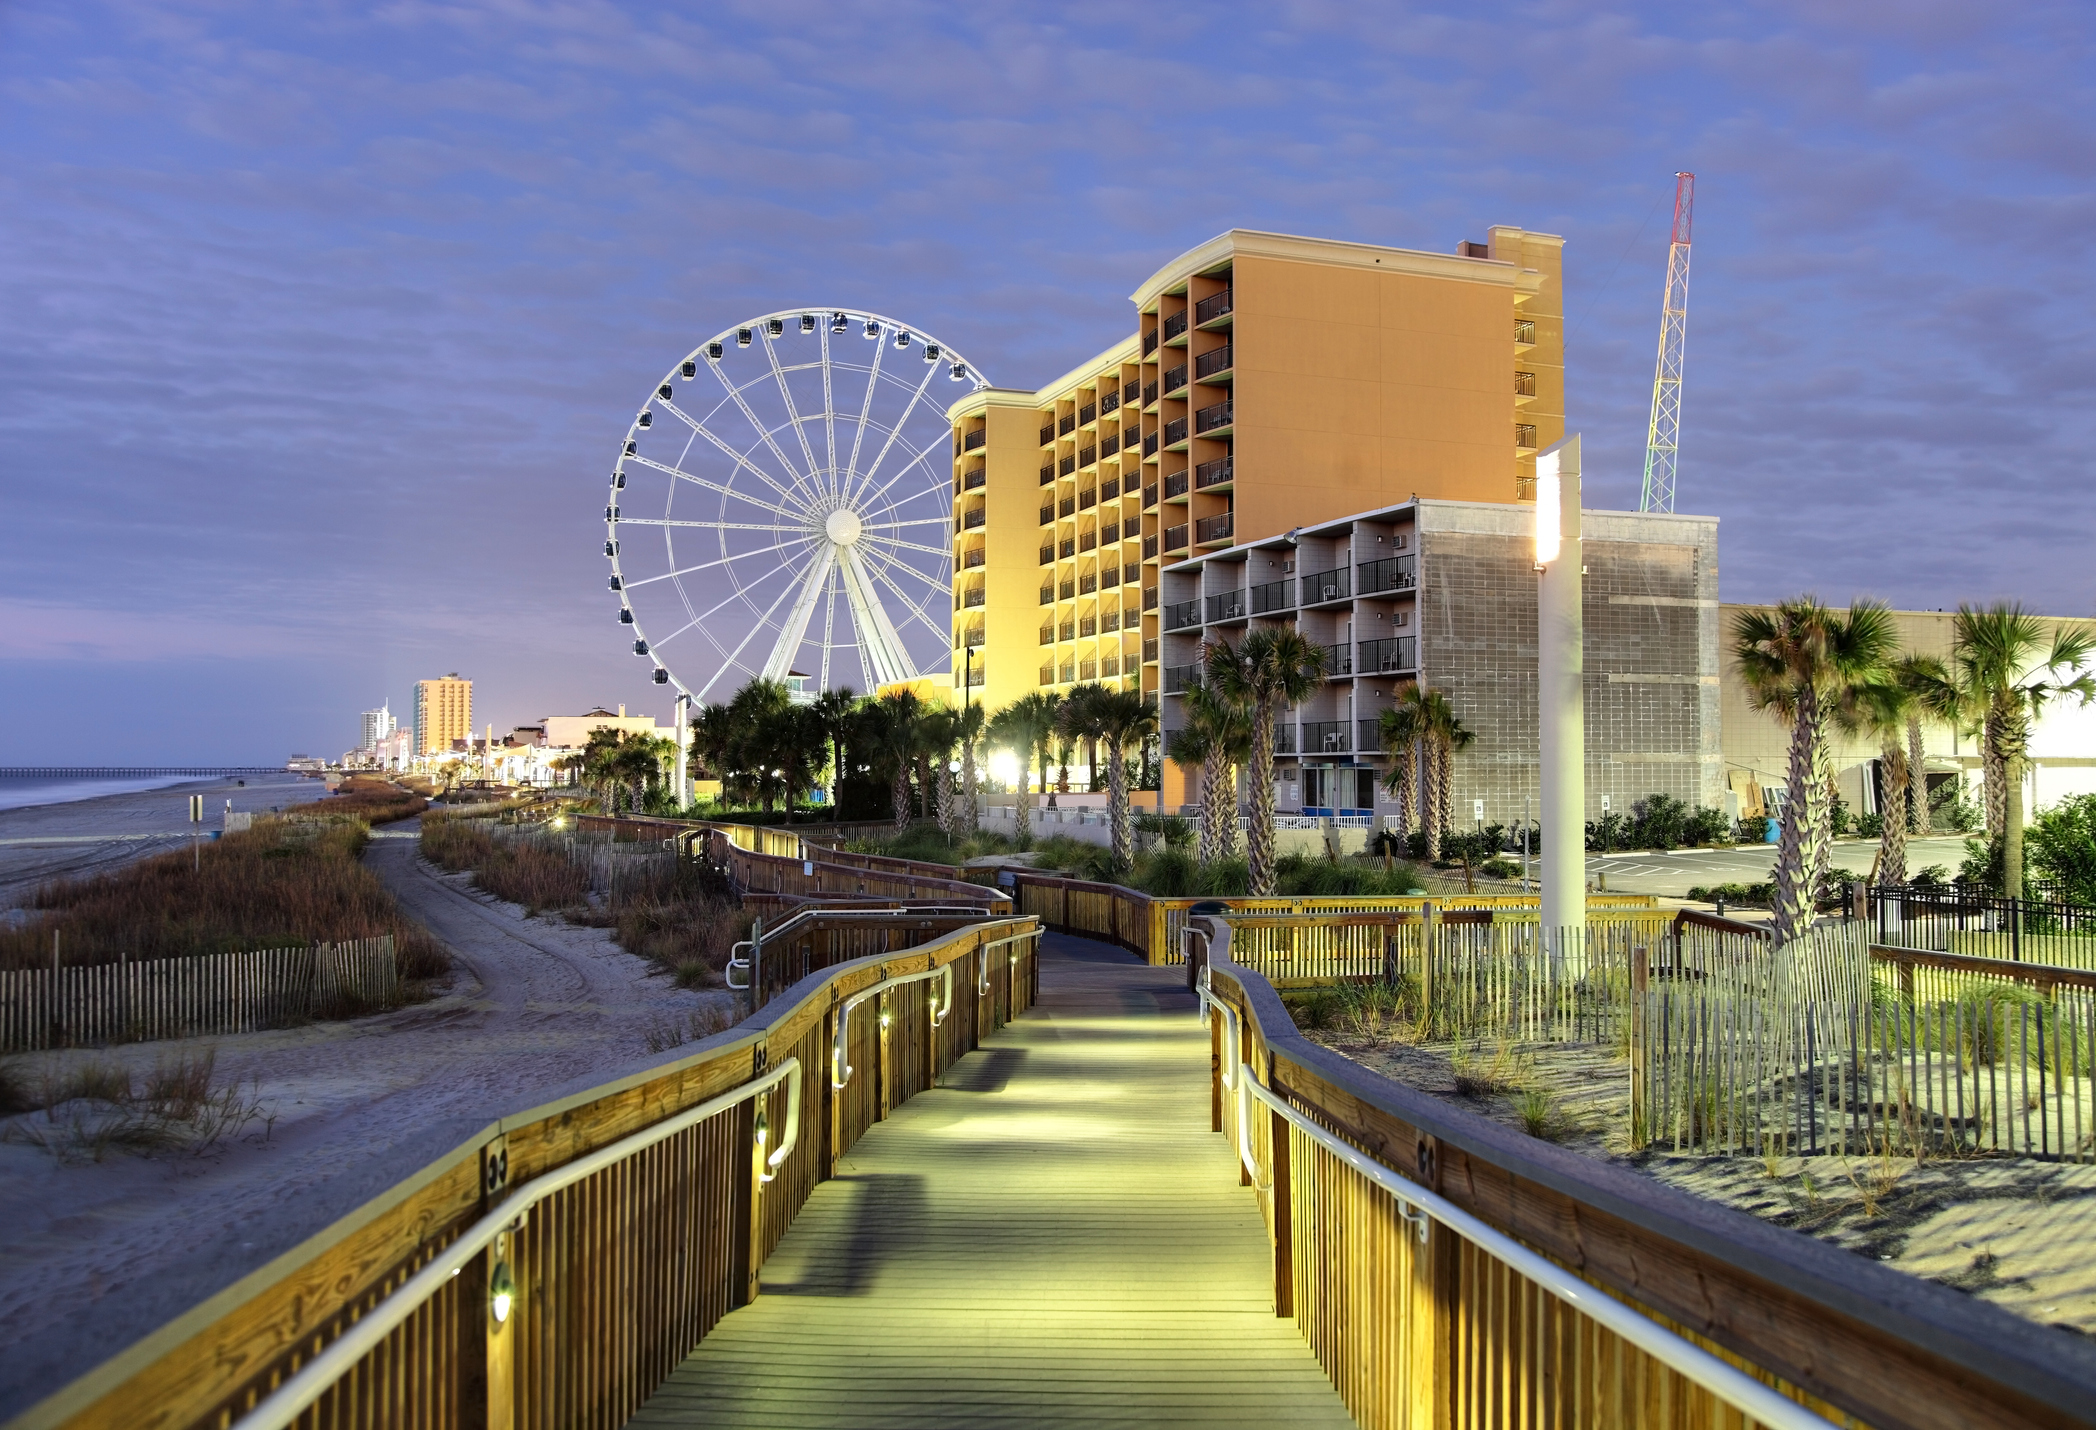 Free Things To Do in Myrtle Beach - The Boardwalk